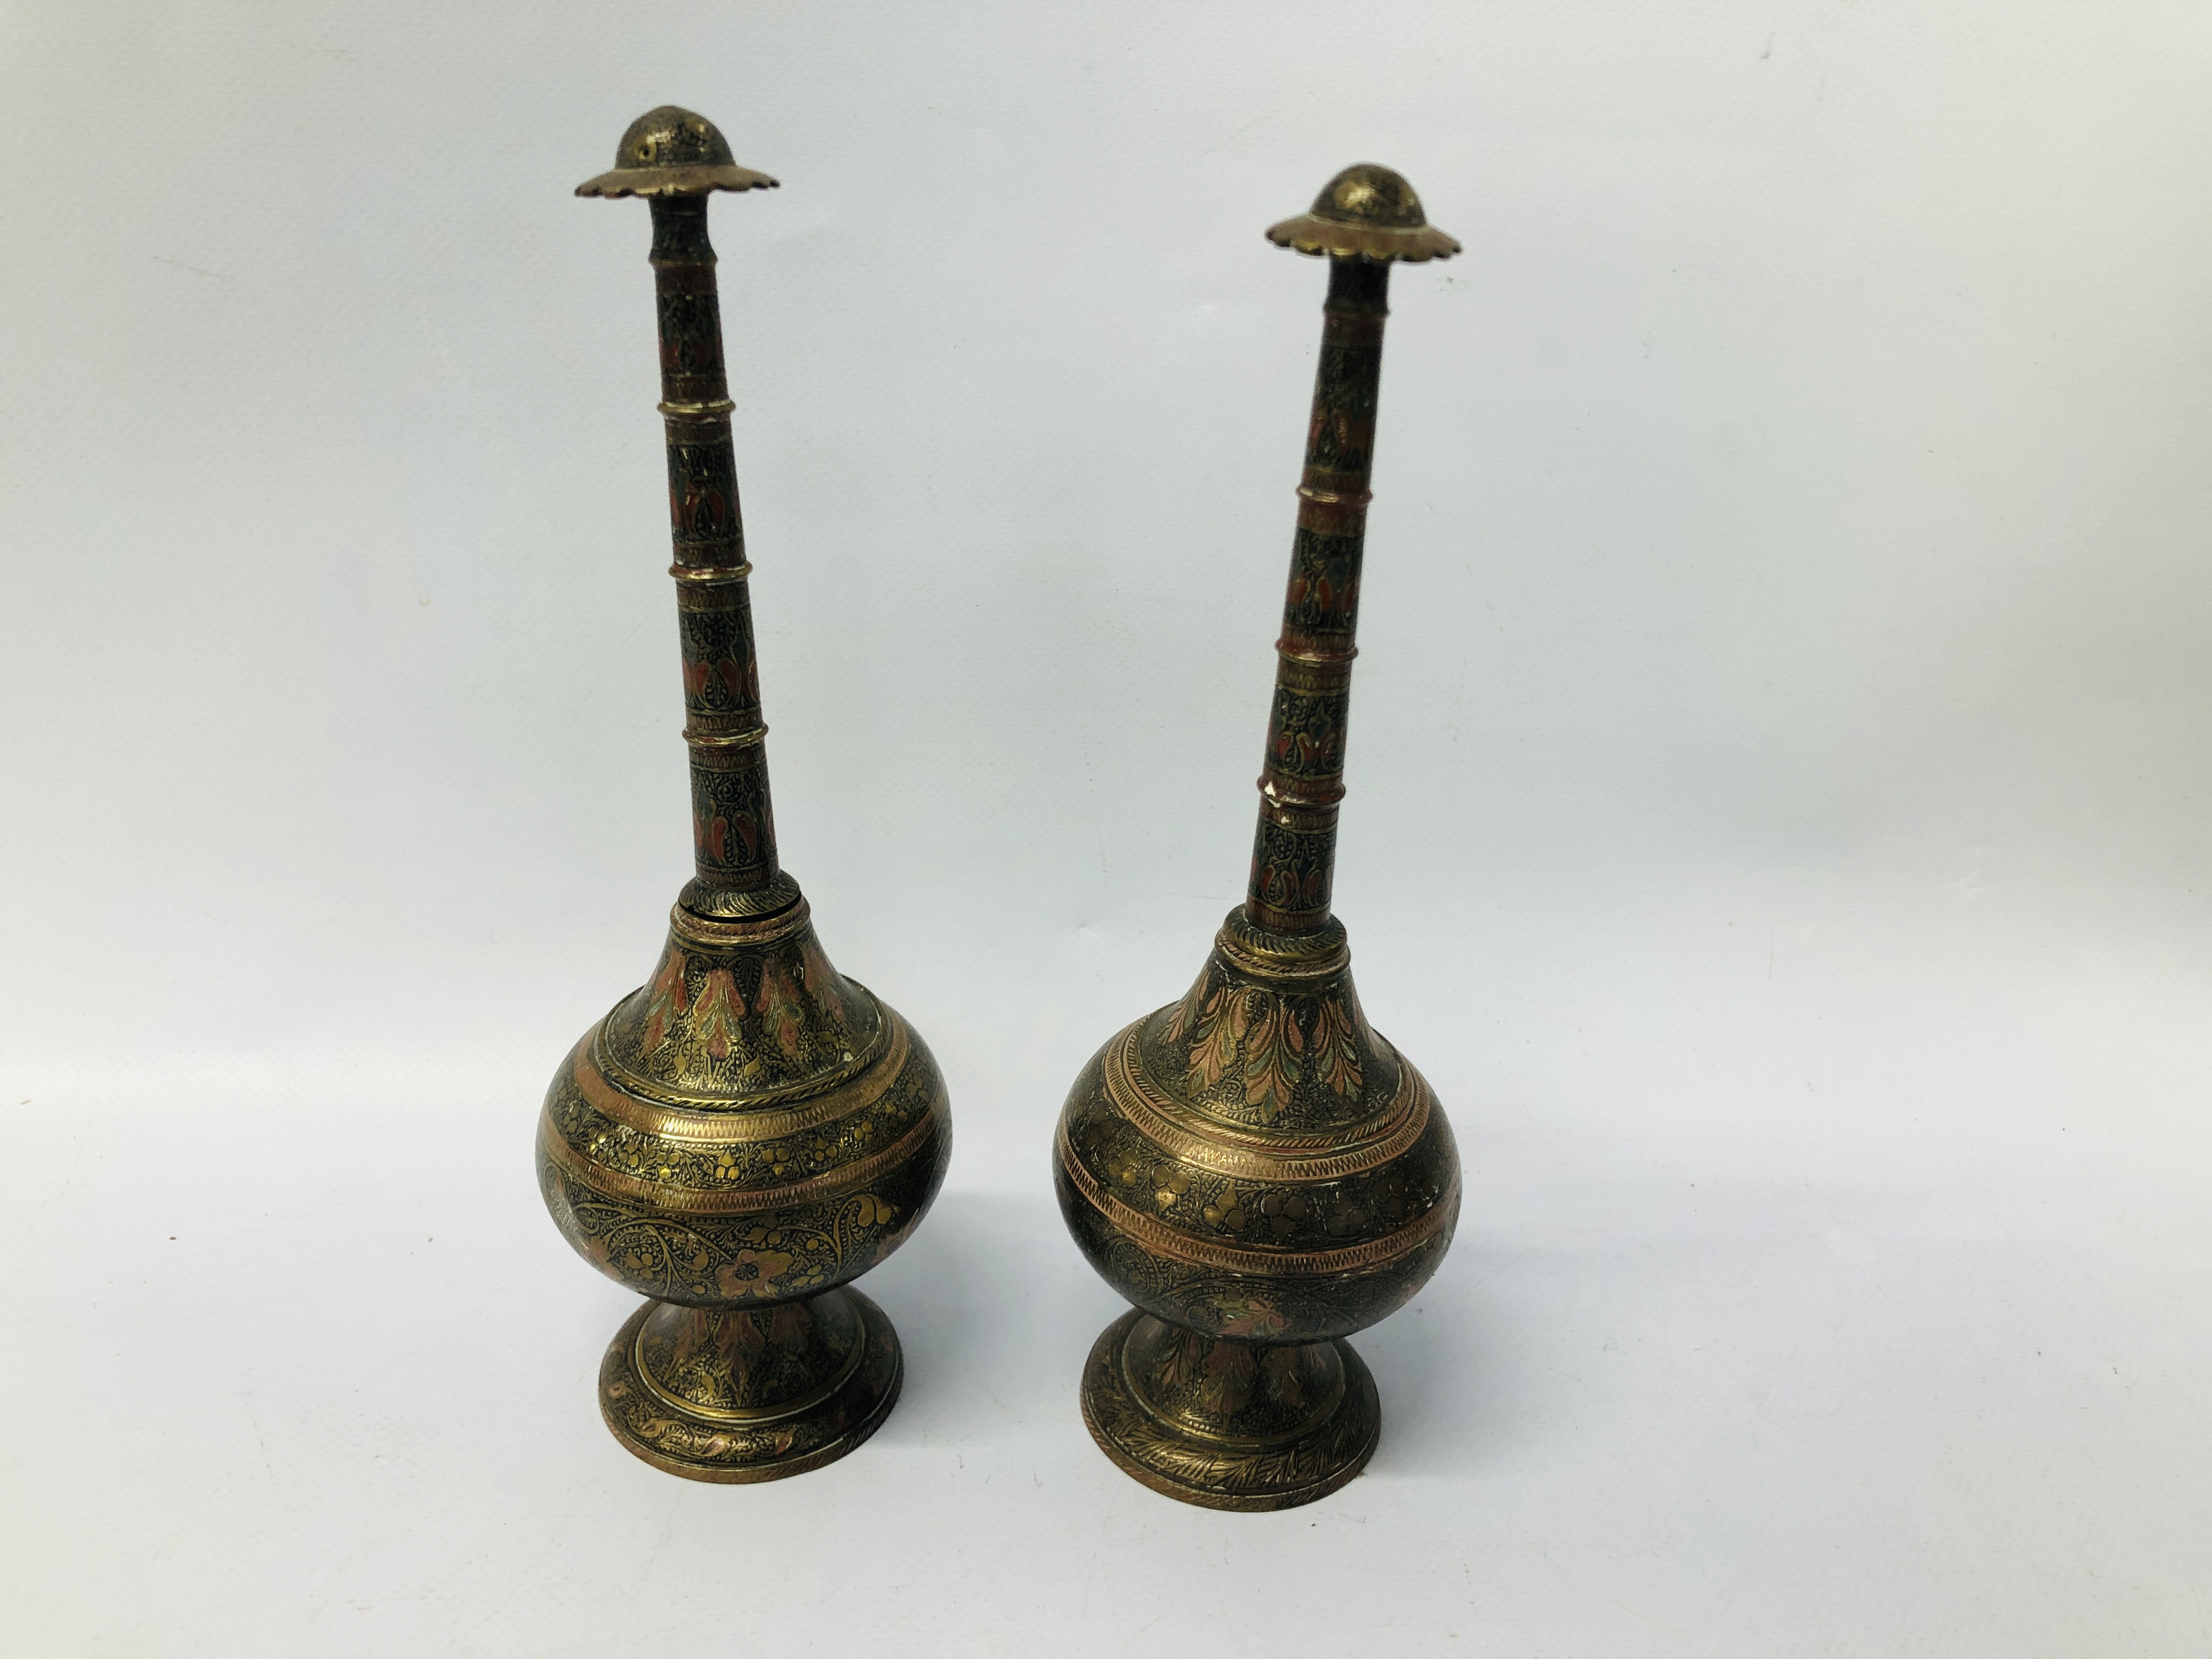 MIXED BRASS AND COPPER TO INCLUDE OIL LAMPS, LAMPS, STOVE, TRIVET, WATERING CAN, SCALES, CUPS, - Image 24 of 27